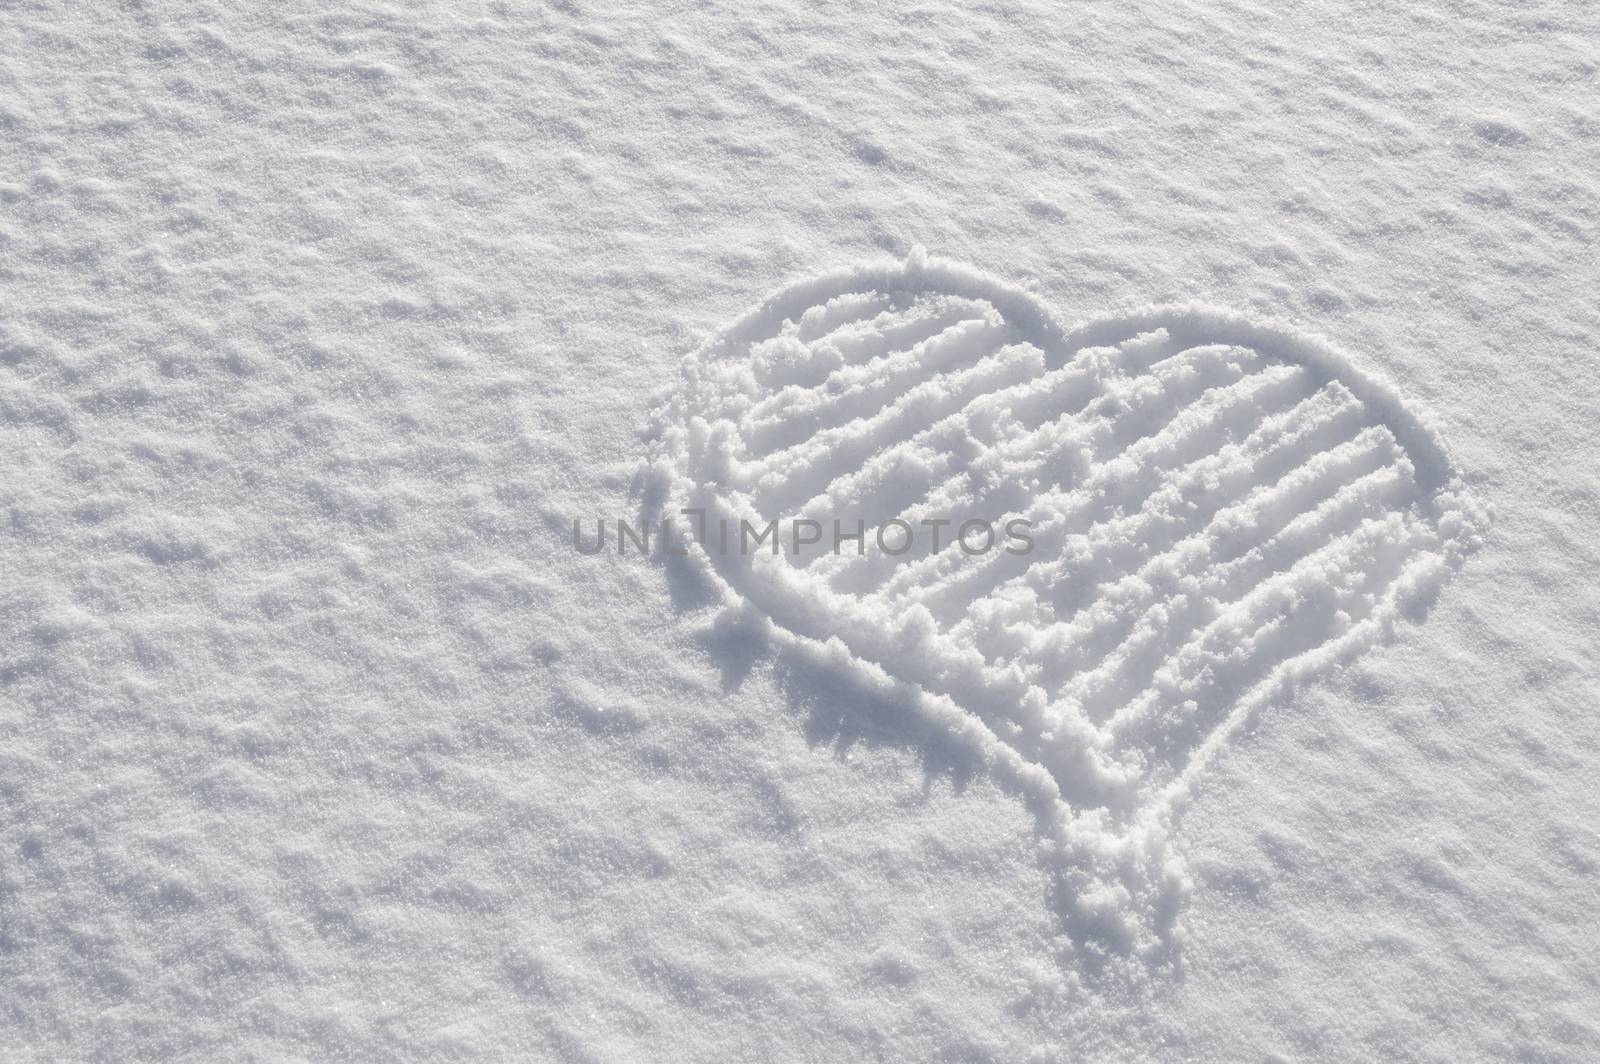 Romantic Valentines heart drawn on the snow love showing love and caring